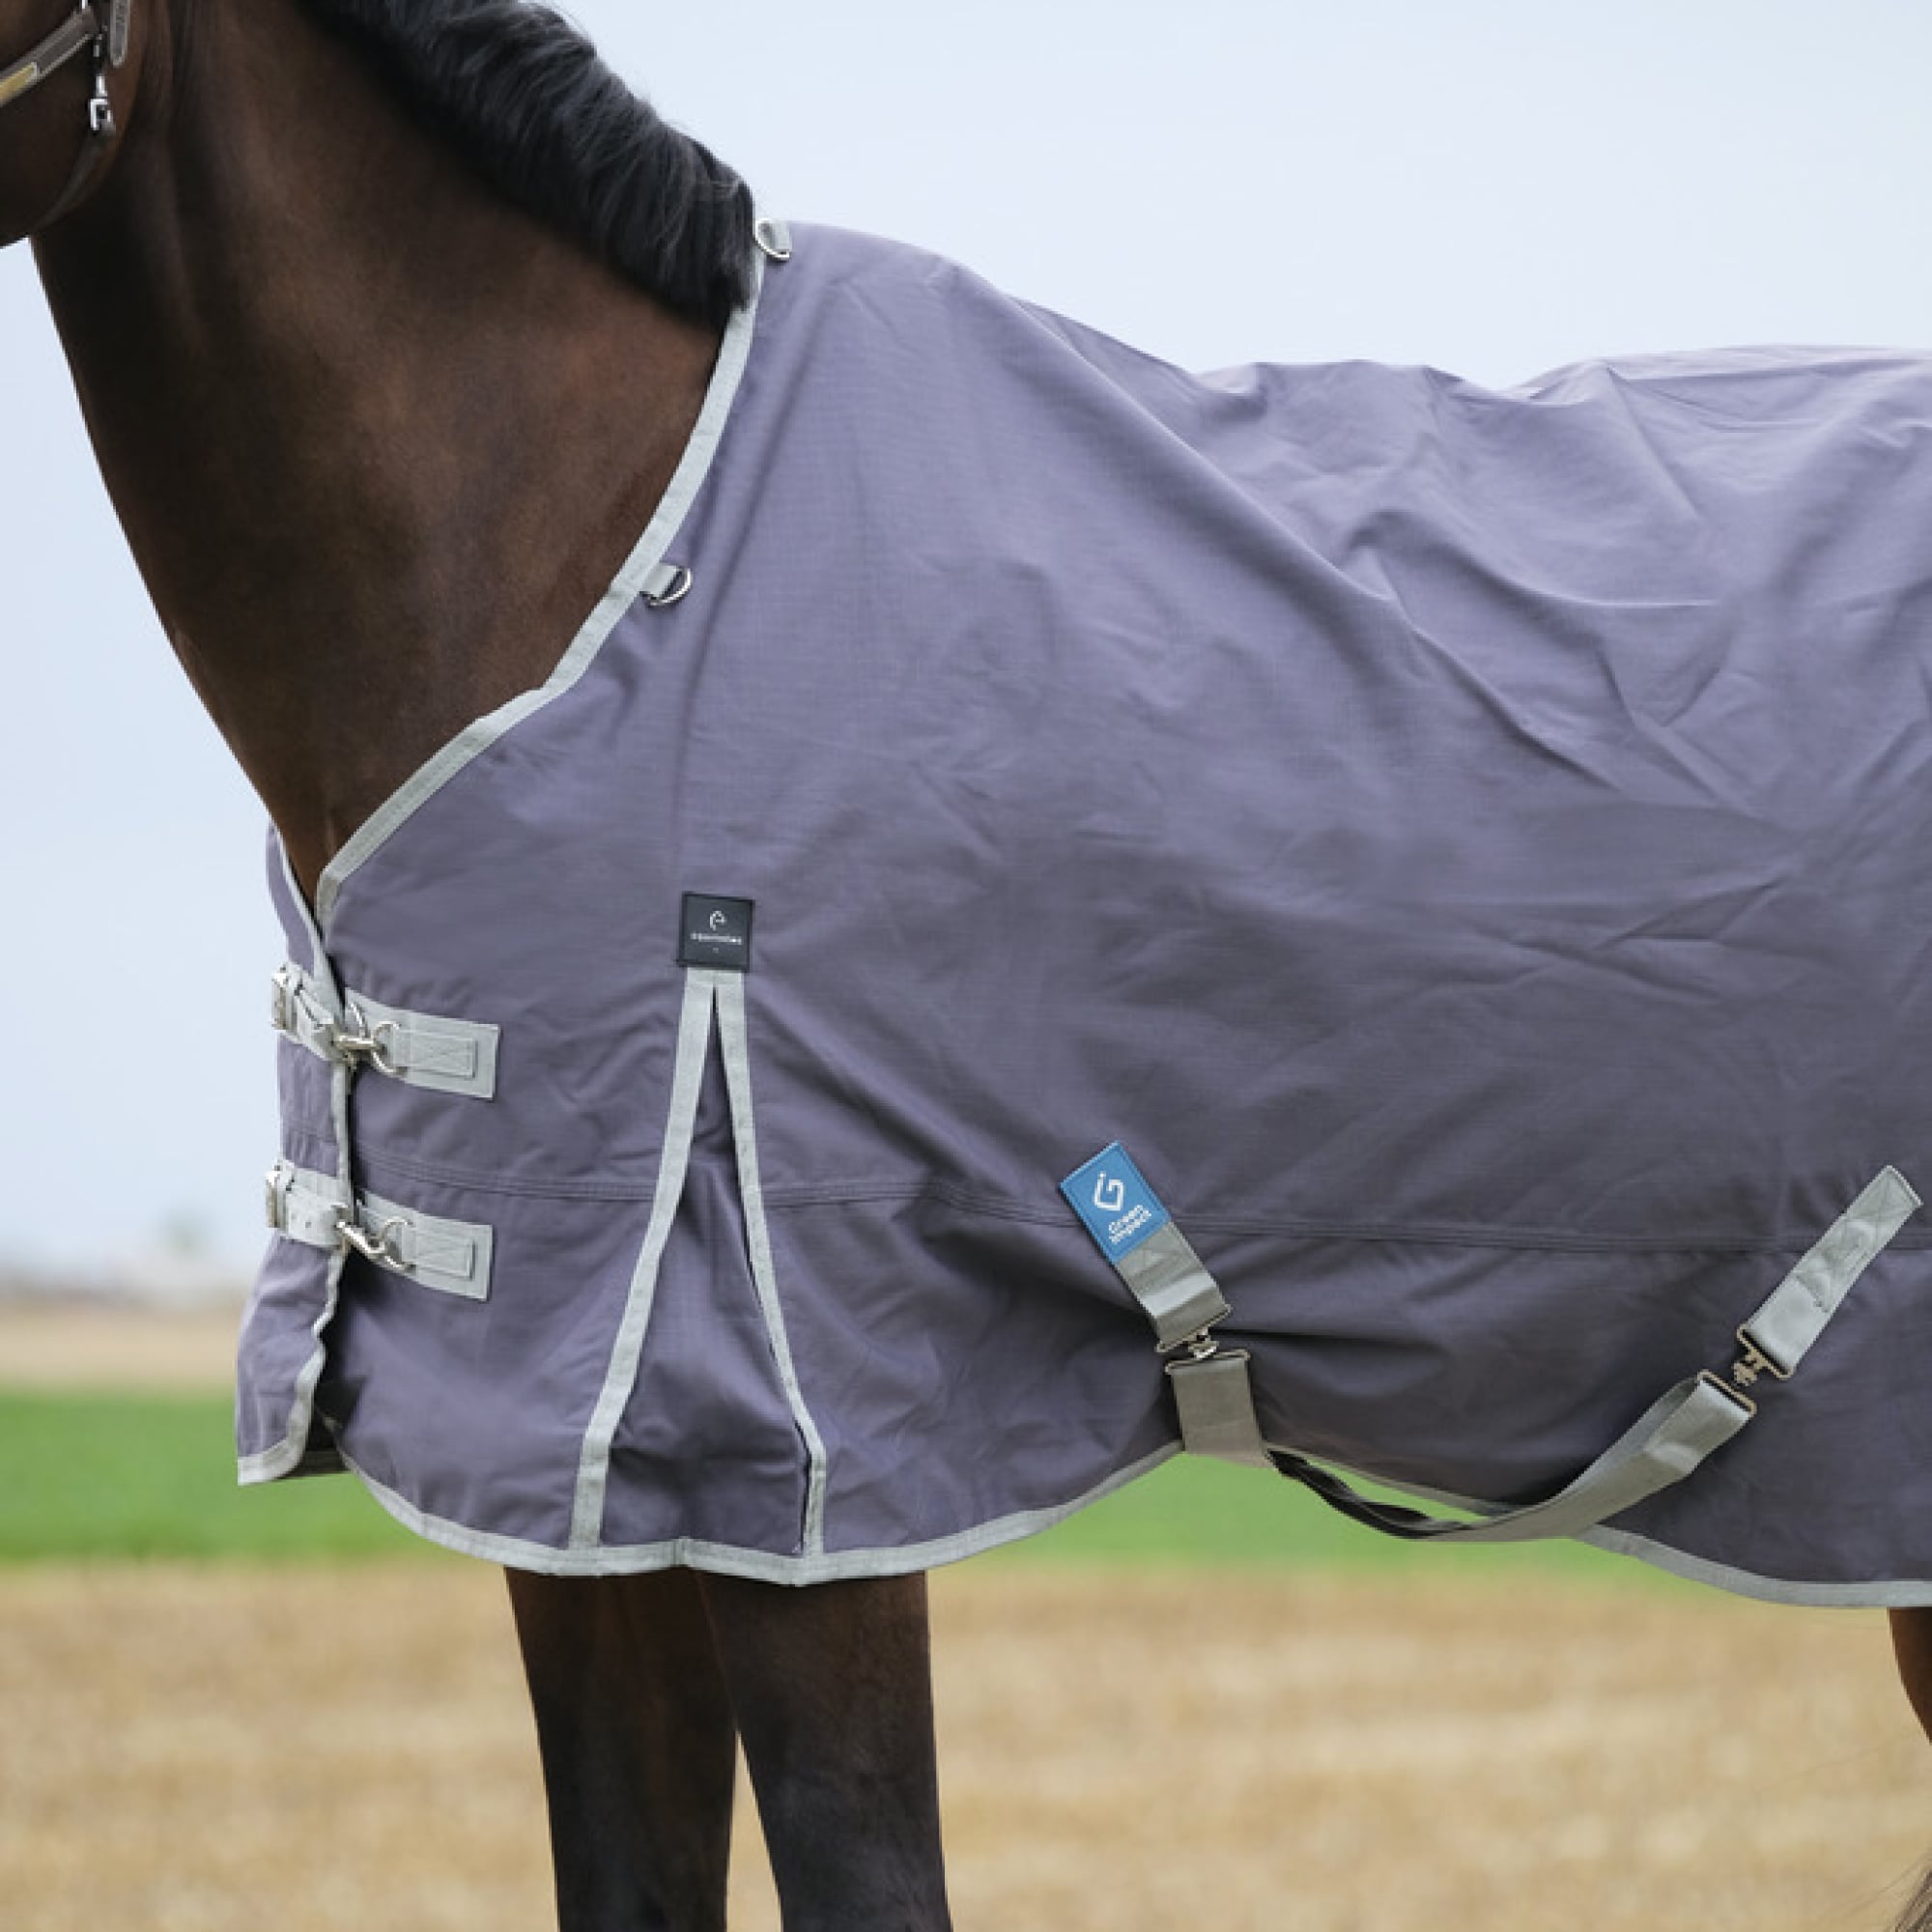 Equitheme Tyrex 1200D Recycled Turnout Rug, 150g